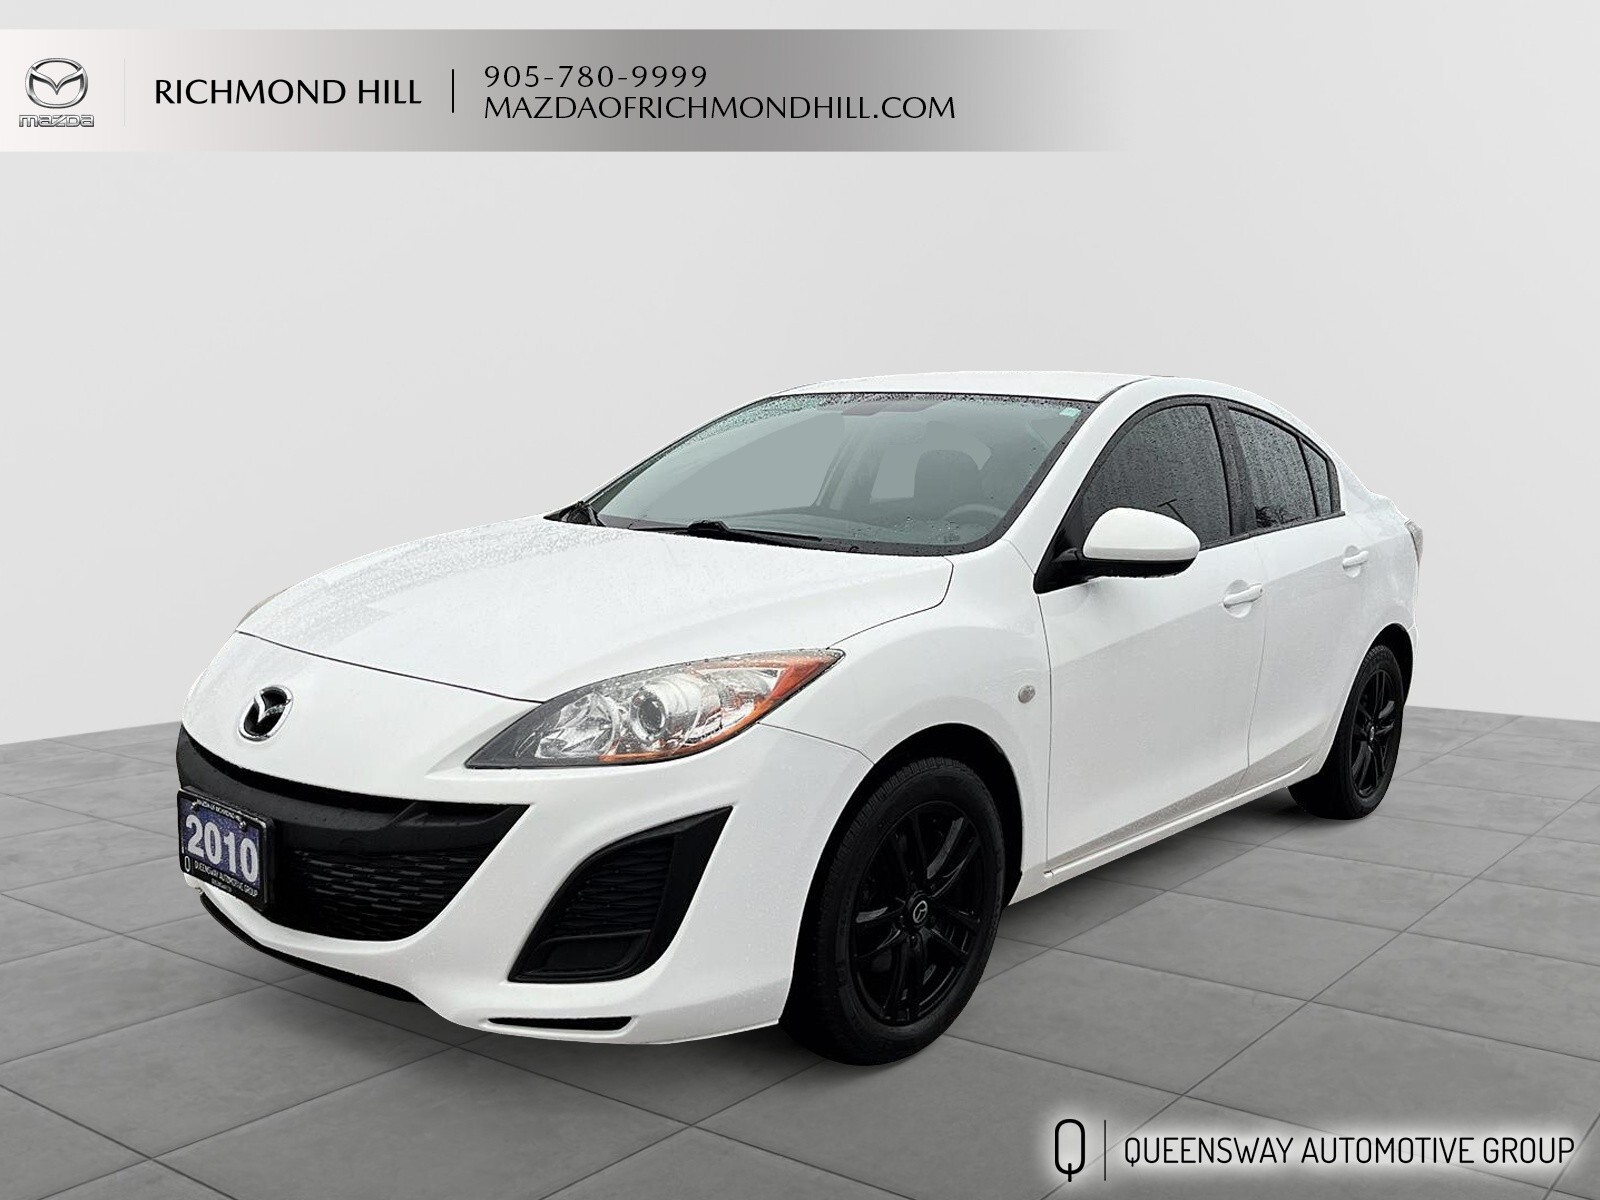 2010 Mazda Mazda3 Certified|Air Conditioning|Power Group